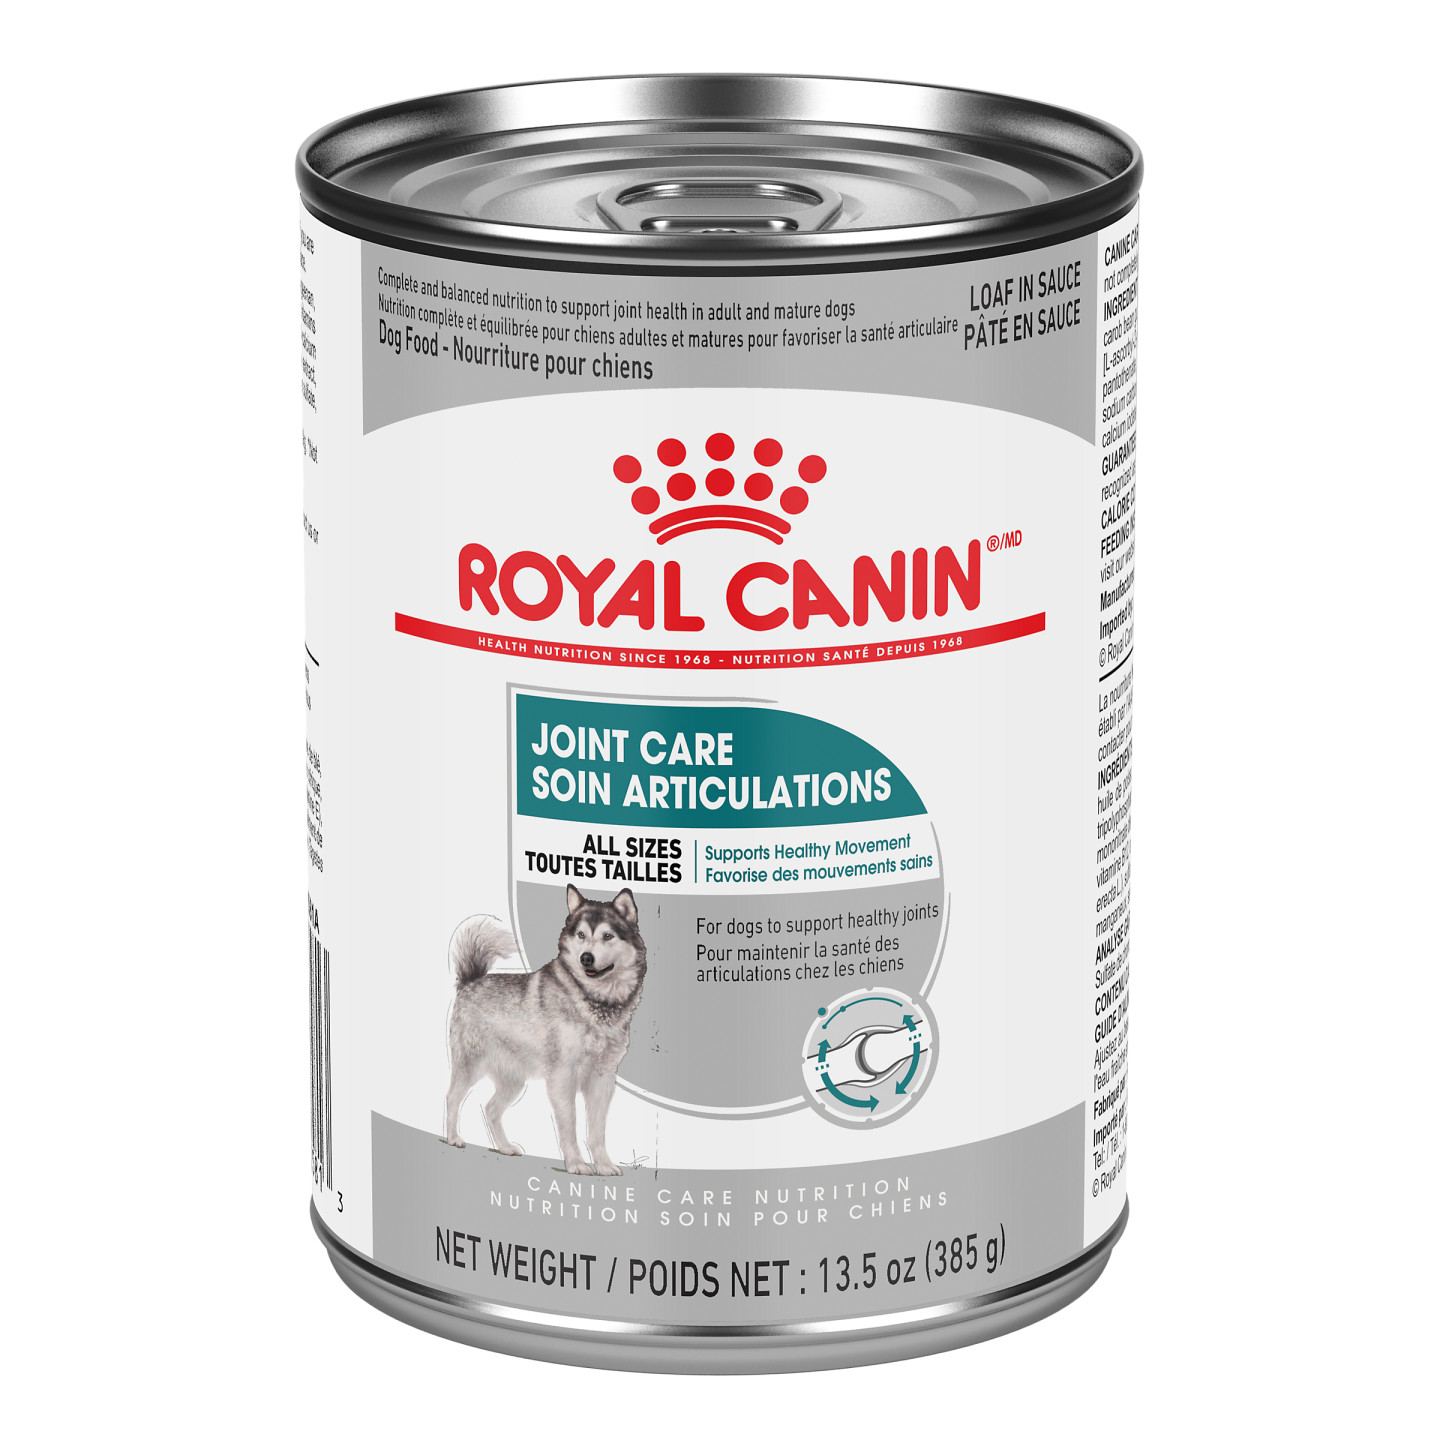 Joint Care Canned Dog Food - Royal Canin